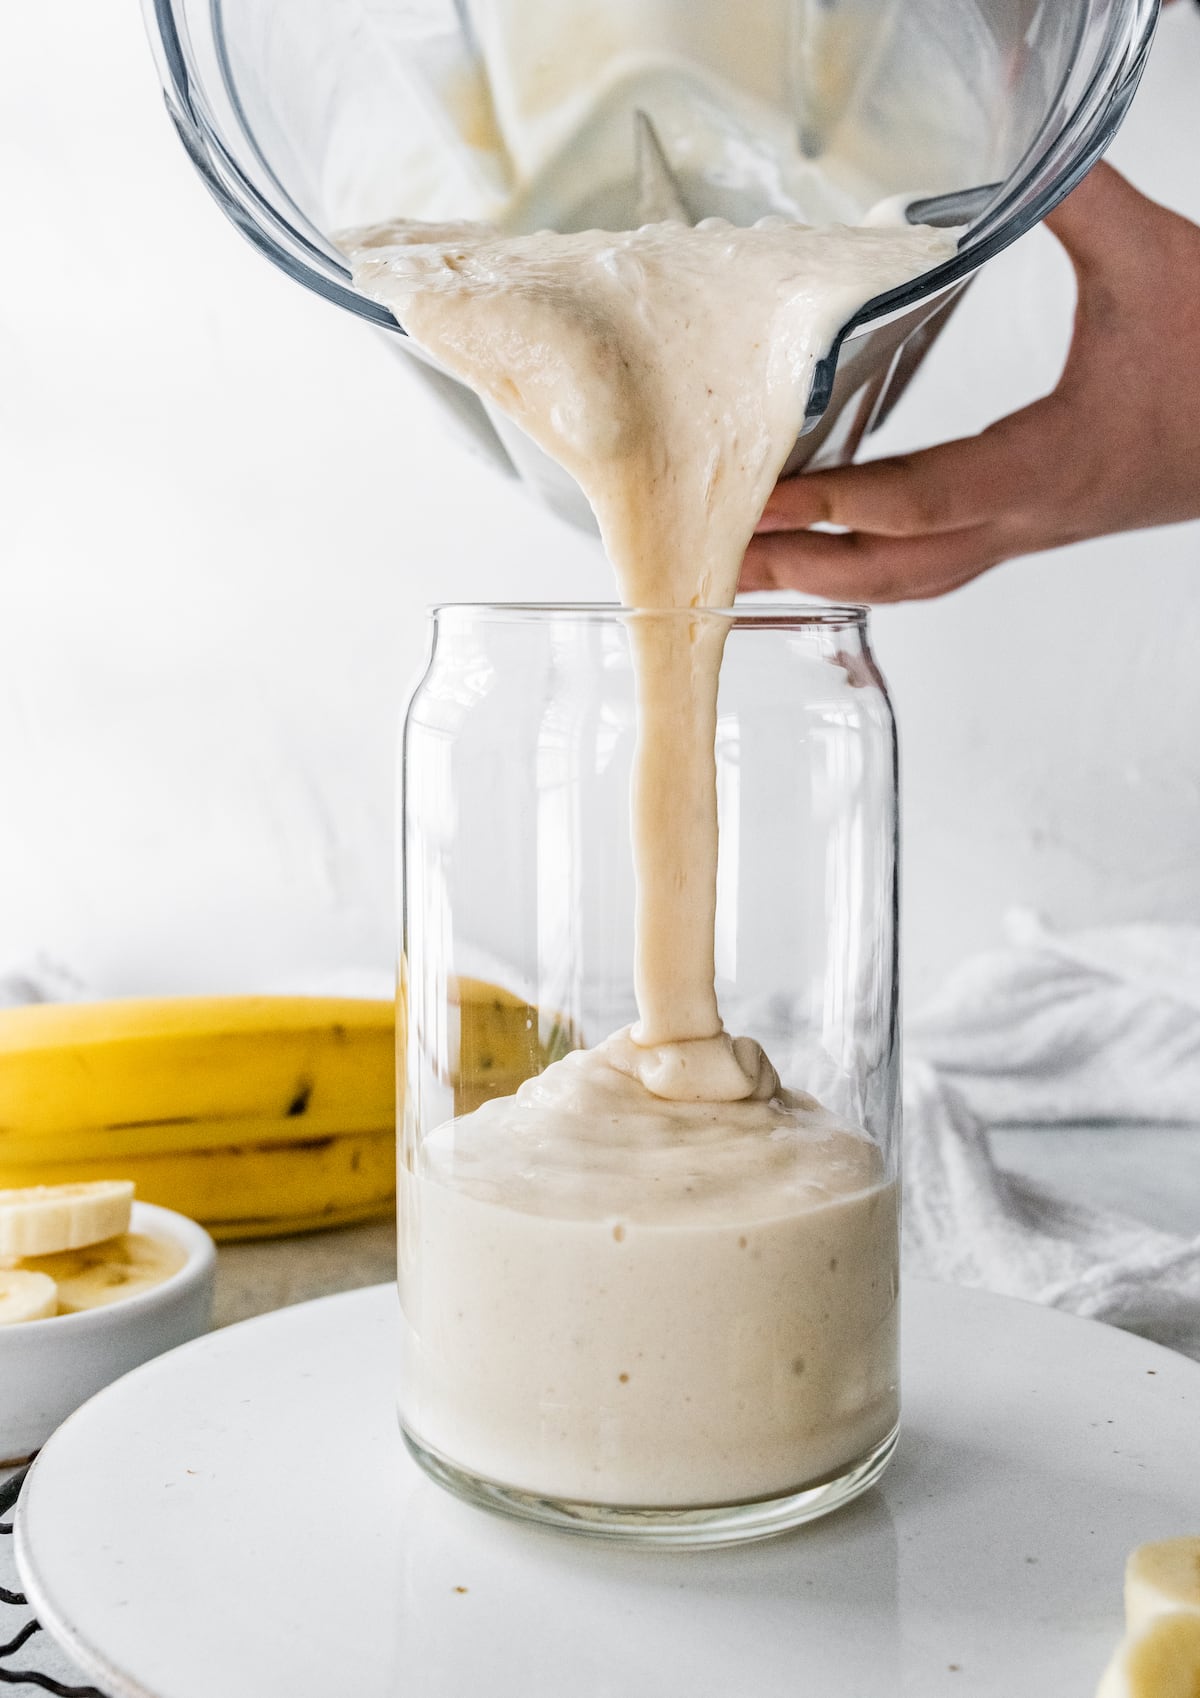 Woman's hand pouring a banana smoothie into a glass.